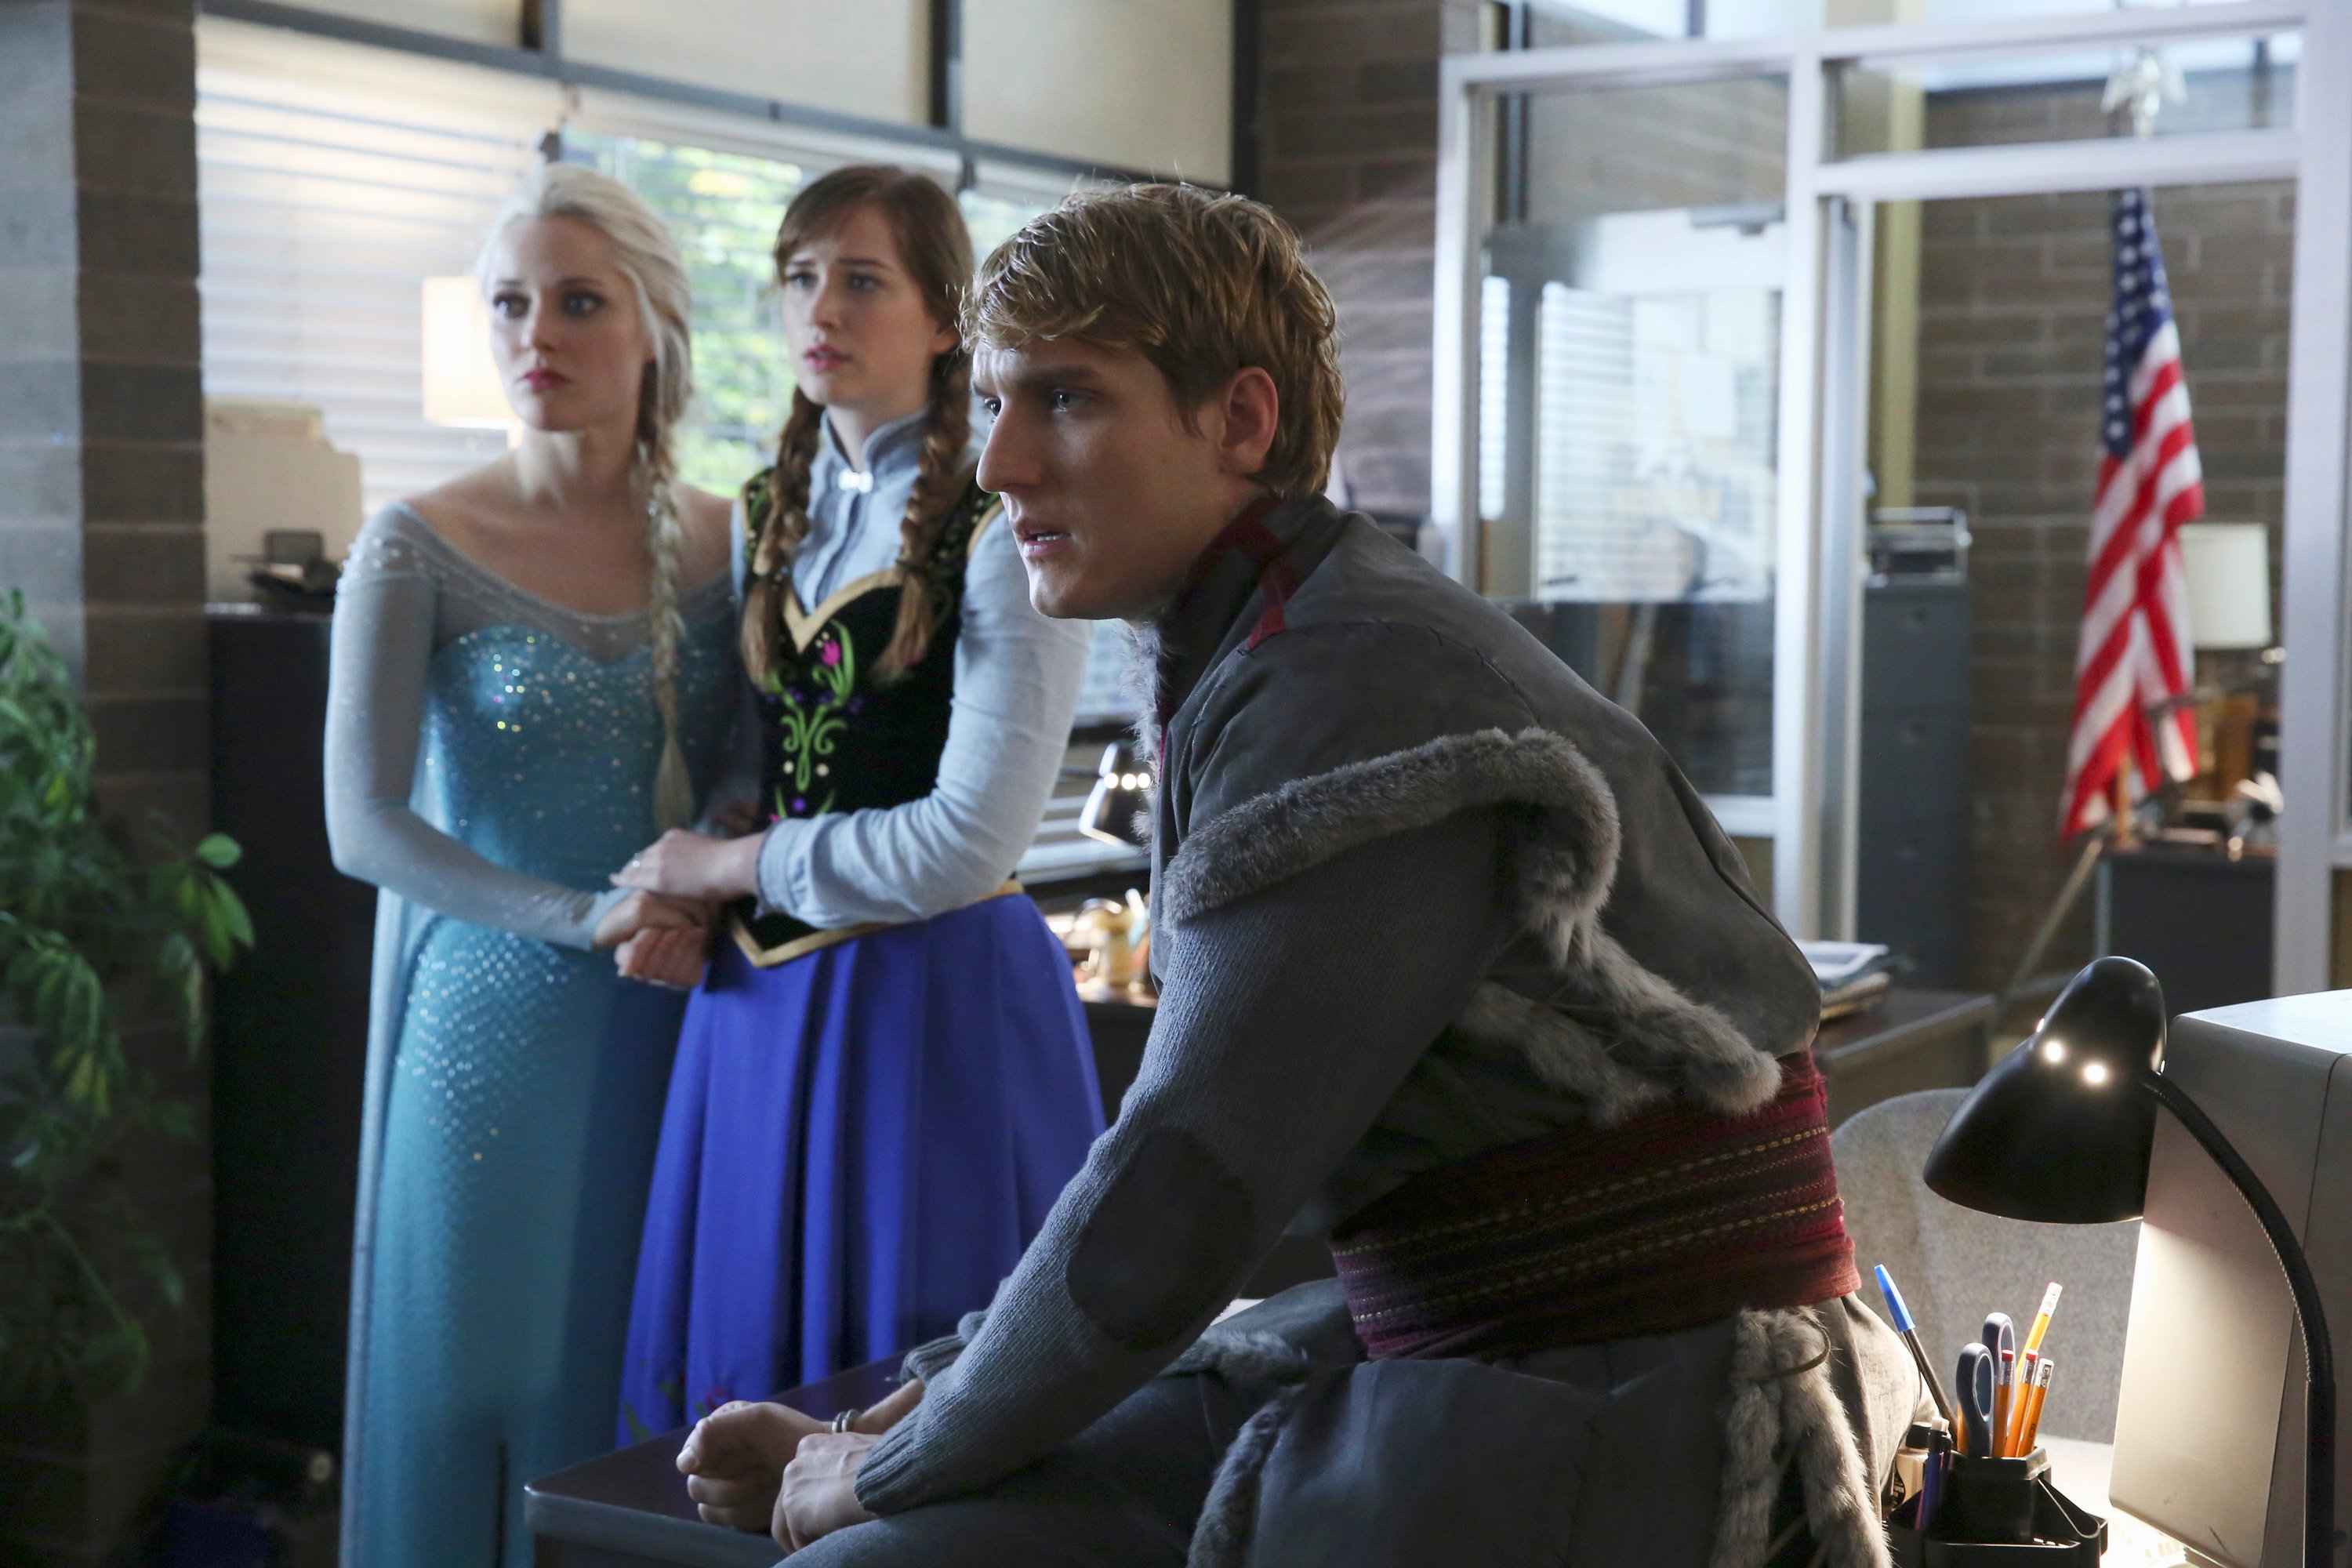 'Frozen' characters on 'Once Upon a Time'